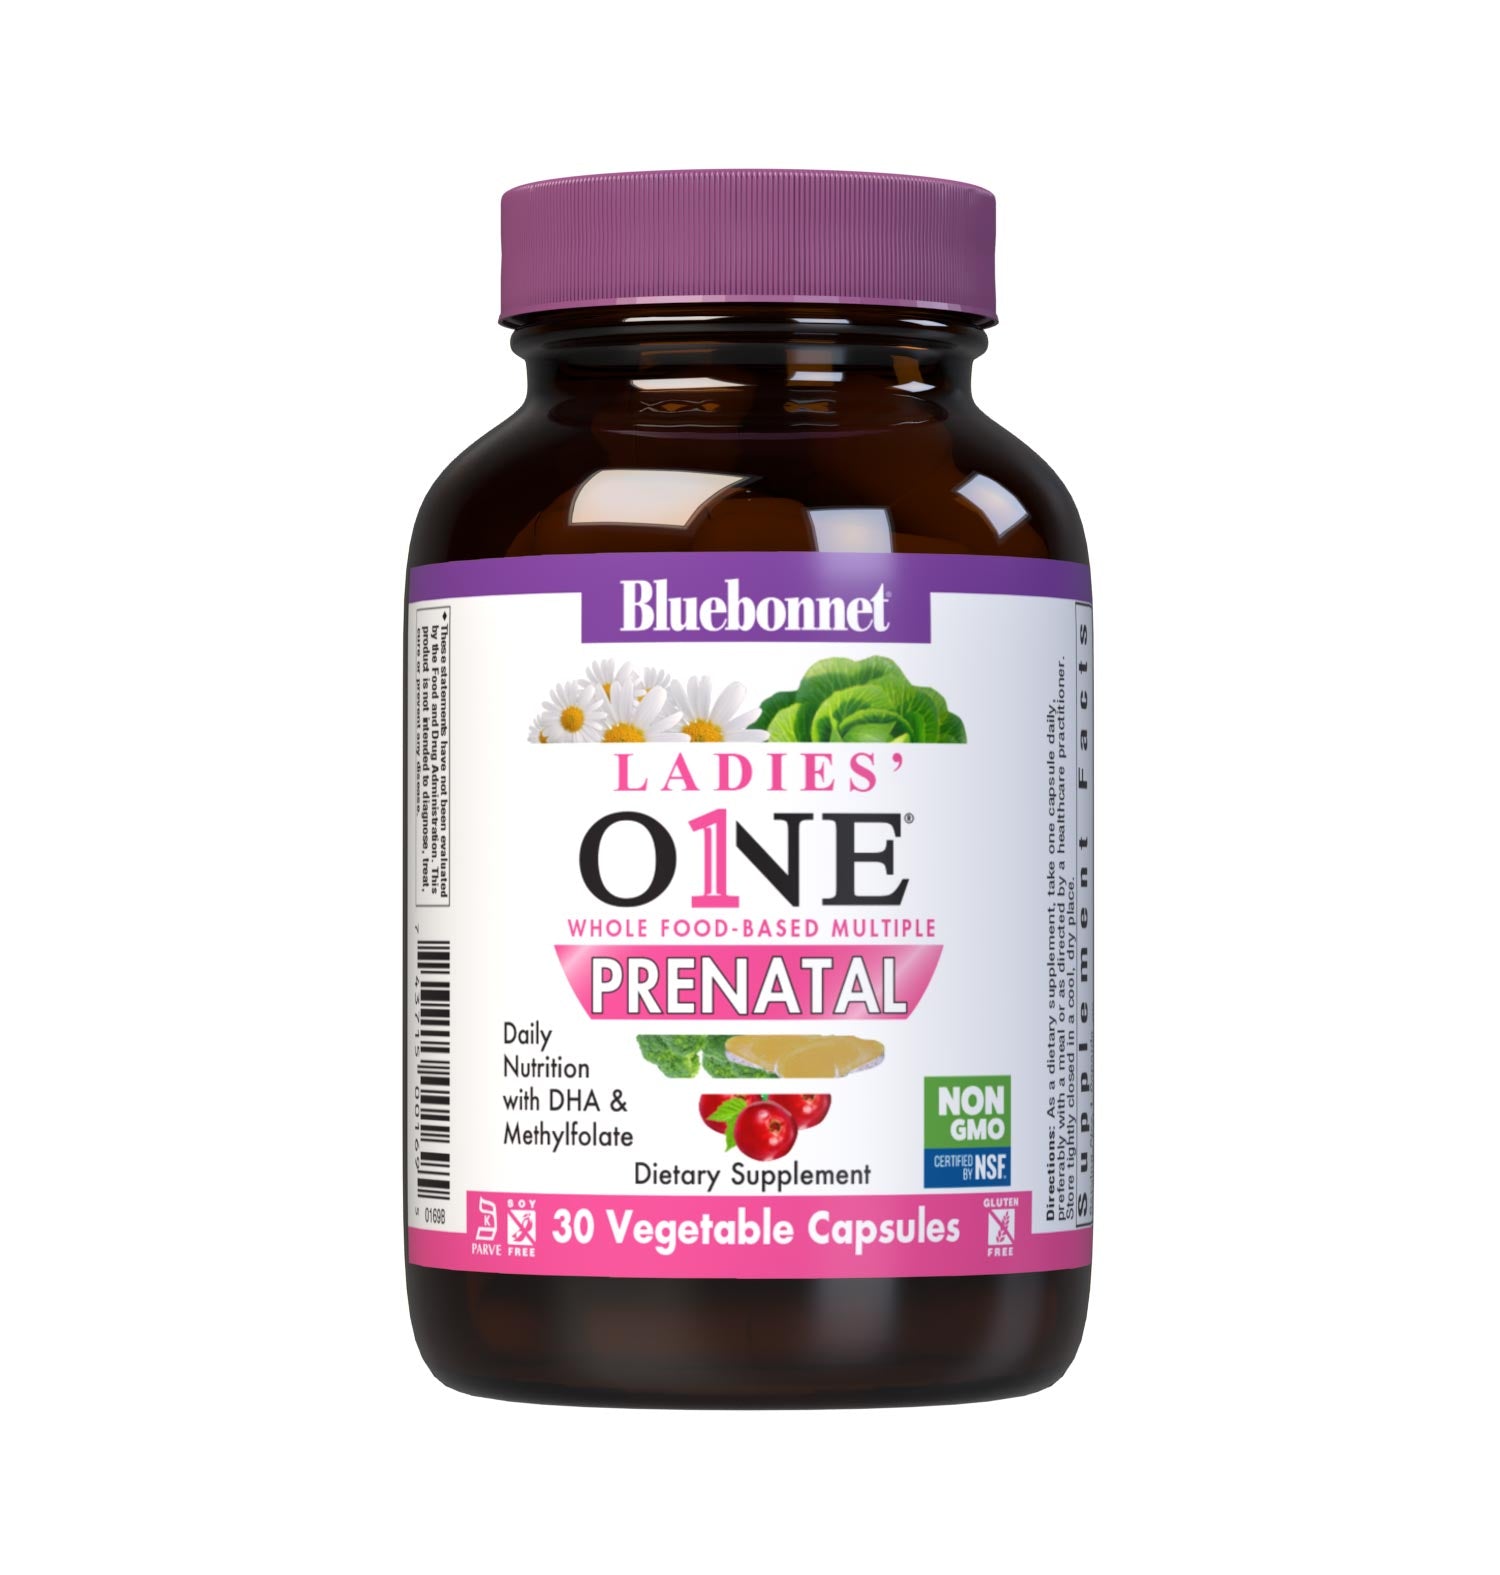 Bluebonnet’s Ladies’ ONE Prenatal Whole Food-Based Multiple 30 vegetable capsules provides daily nutritional support for women trying to conceive, pregnant or nursing in just one convenient capsule per serving. Delivers targeted nutrients for conception and fertility support, healthy pregnancy, proper baby growth and development, and lactation boost. #size_30 count